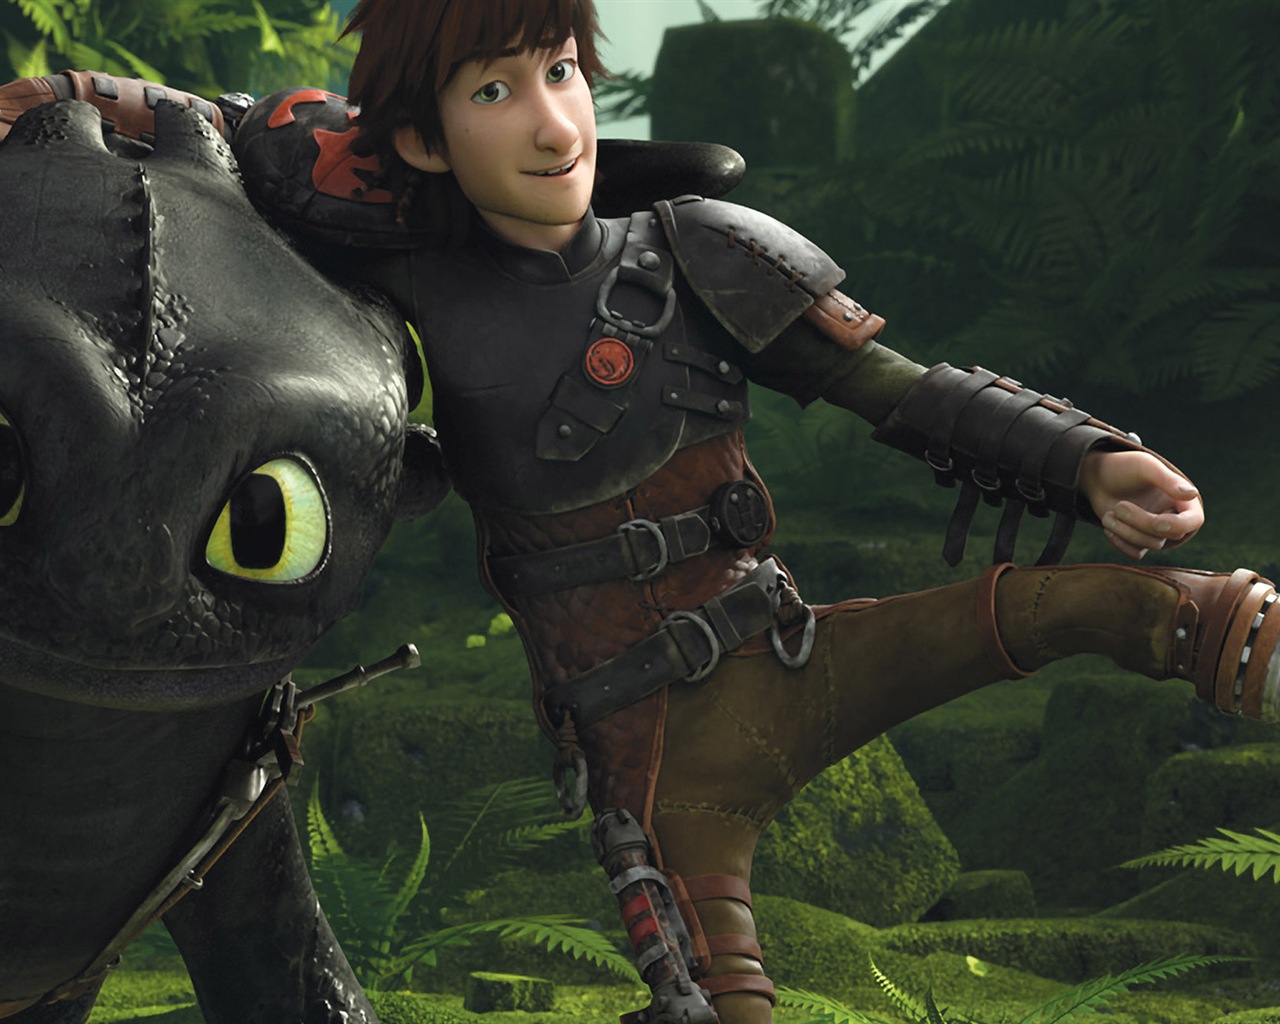 How to Train Your Dragon 2 驯龙高手2 高清壁纸3 - 1280x1024